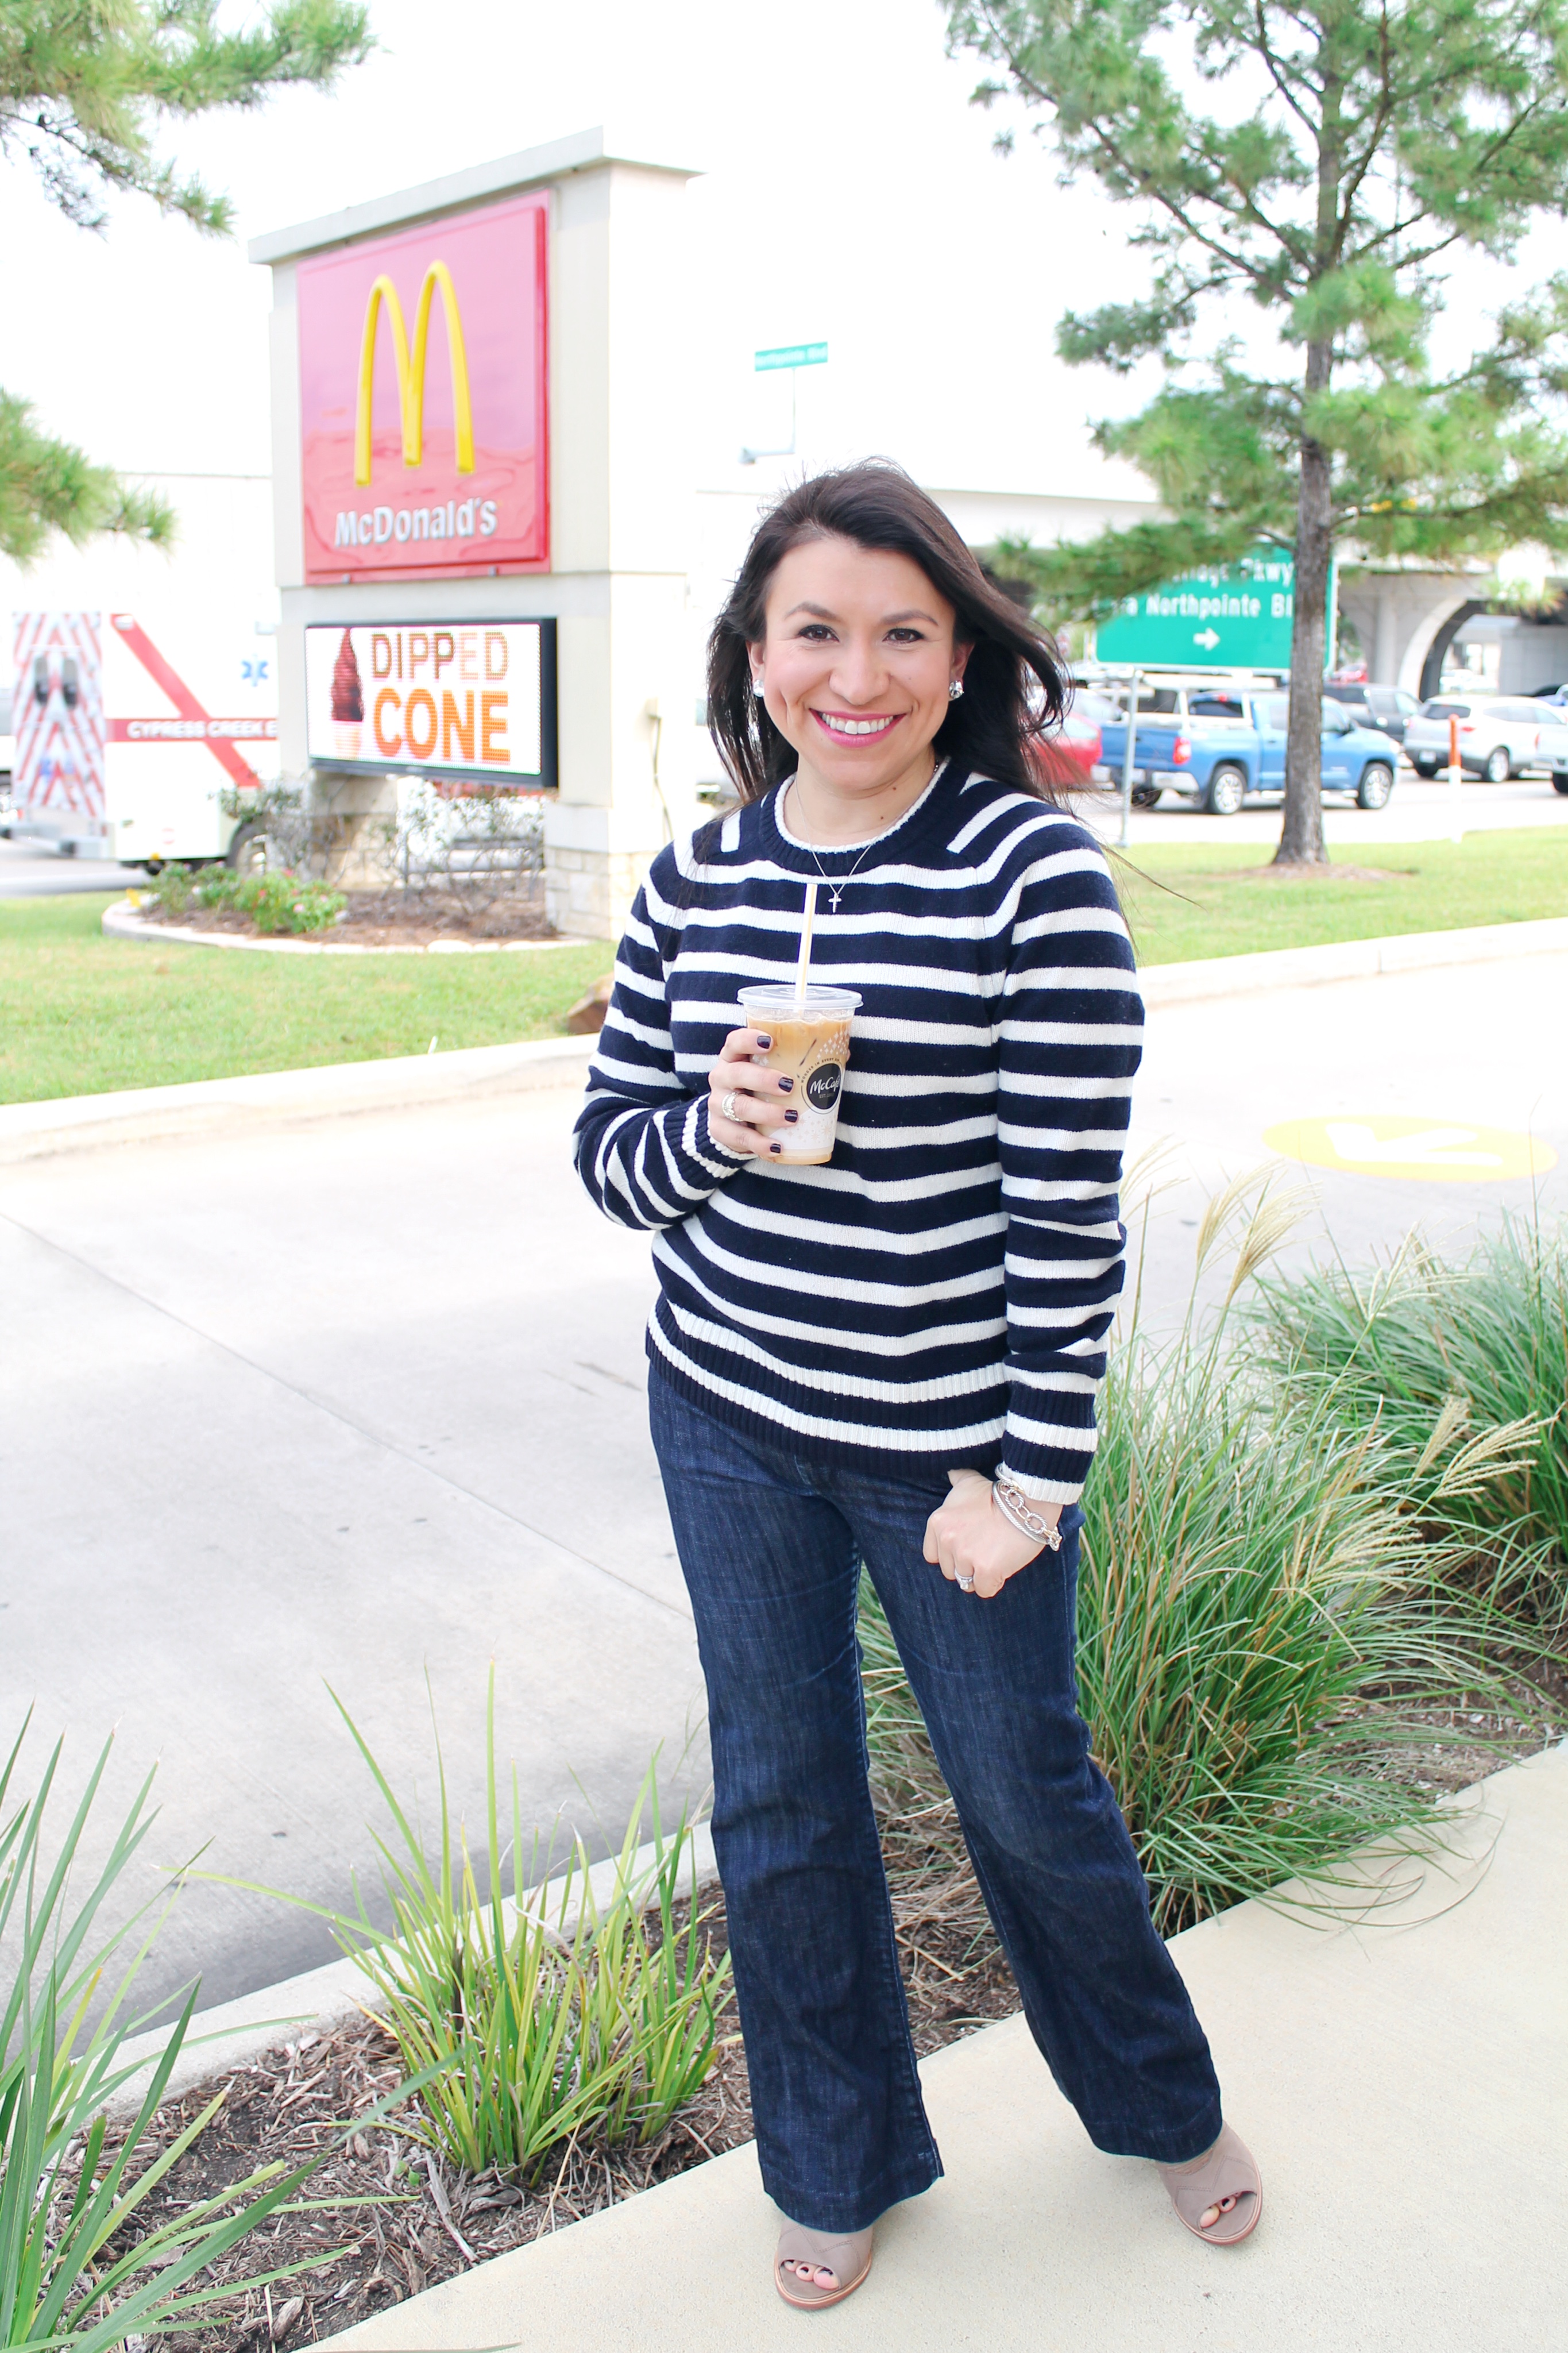 7 tips to create a stellar weekly routine! Number 1 is my favorite: coffee. Check out all the details in this must-read. #ad #mccafe #mcdonalds #coffee